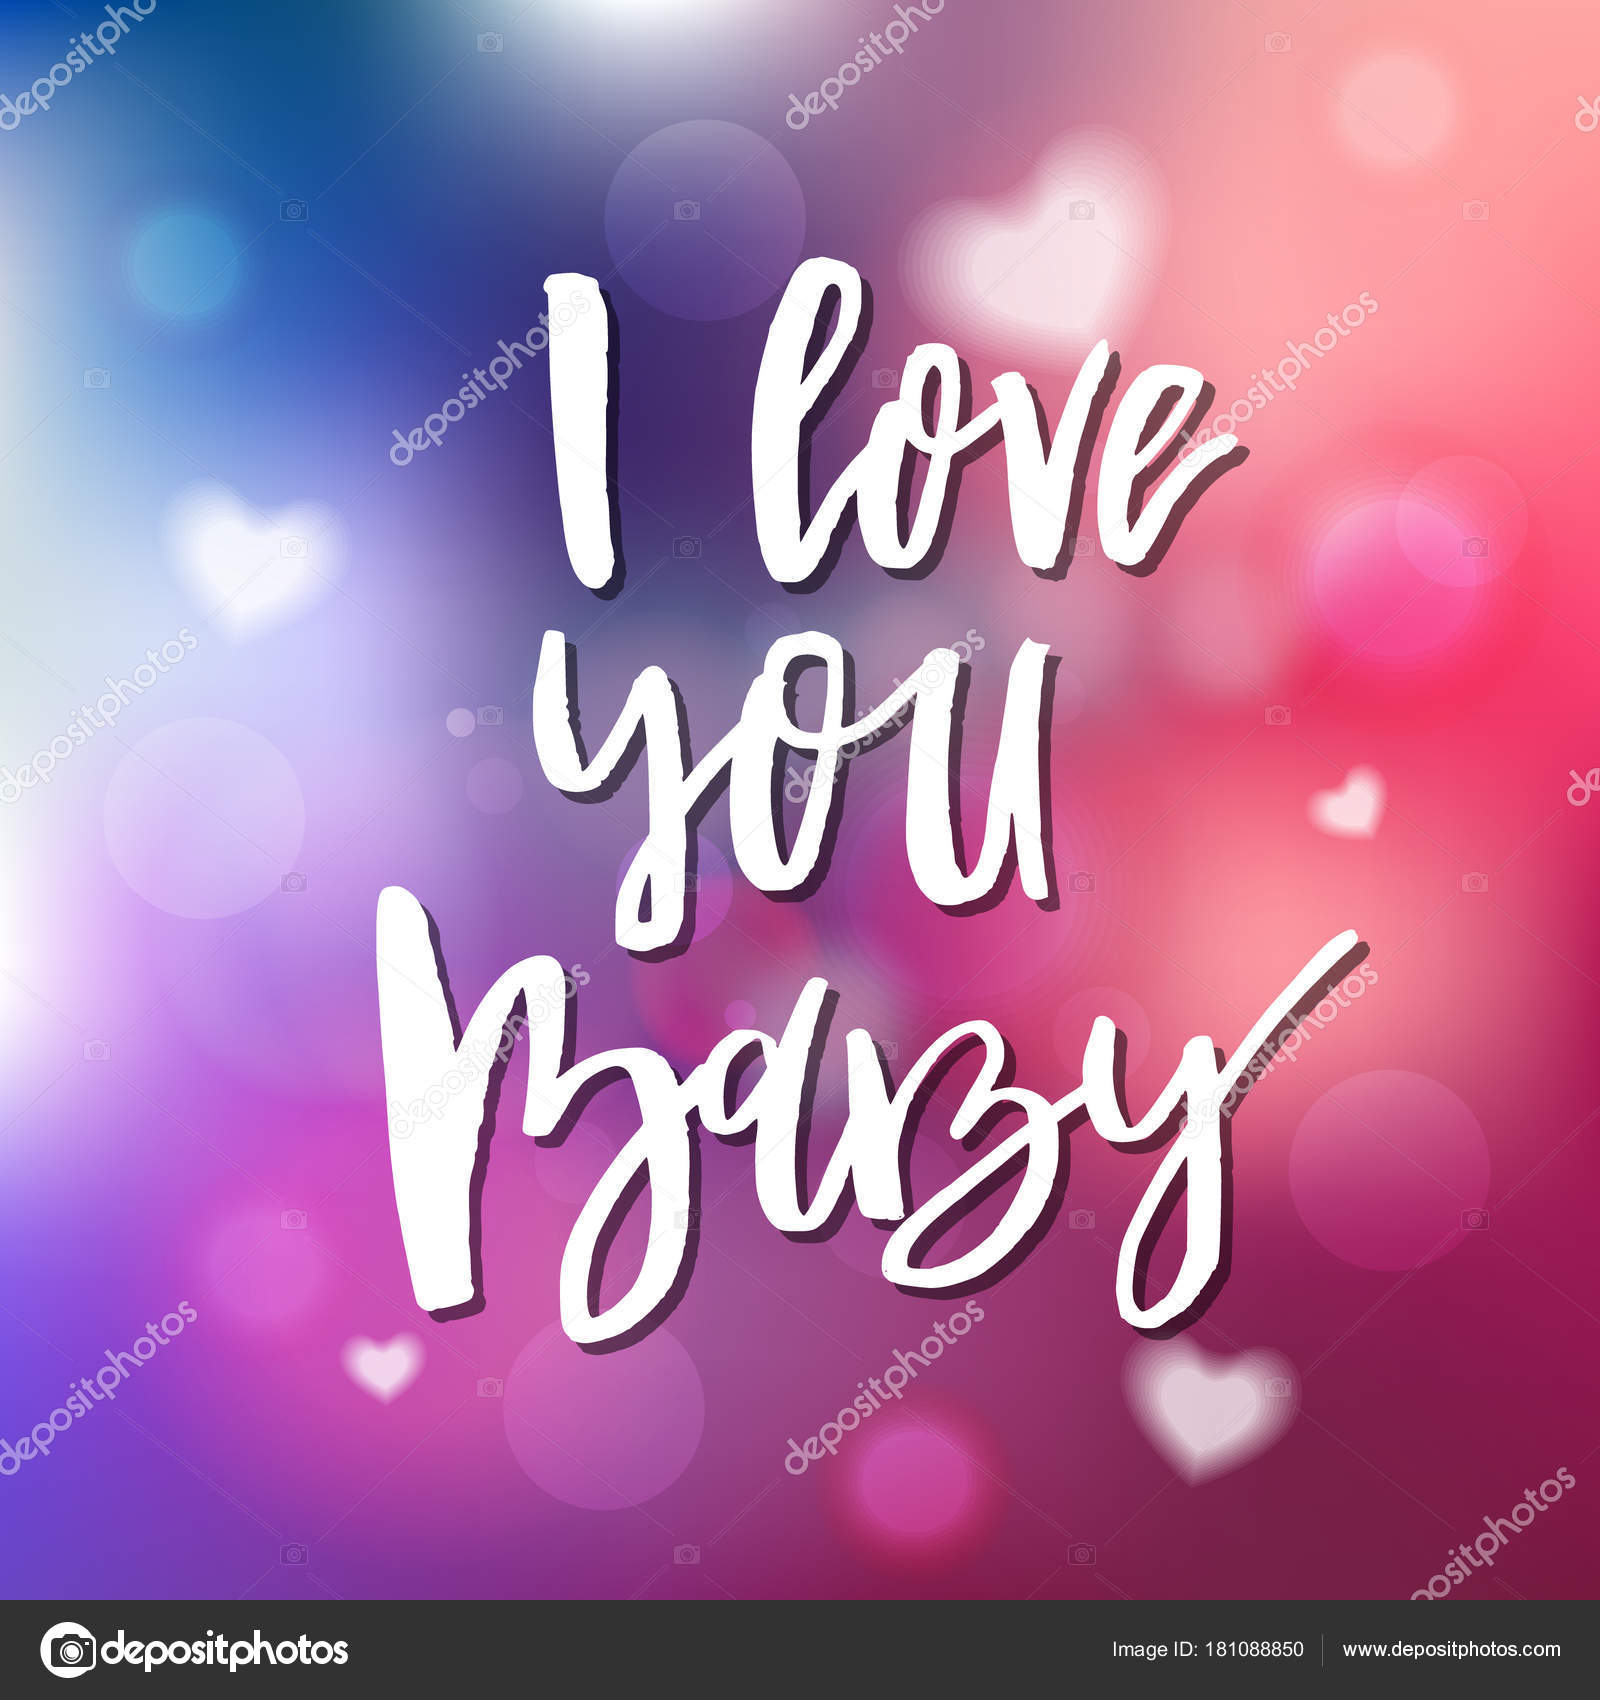 I Love You Baby Calligraphy For Invitation Greeting Card Pri Vector Image By C 21kompot Vector Stock